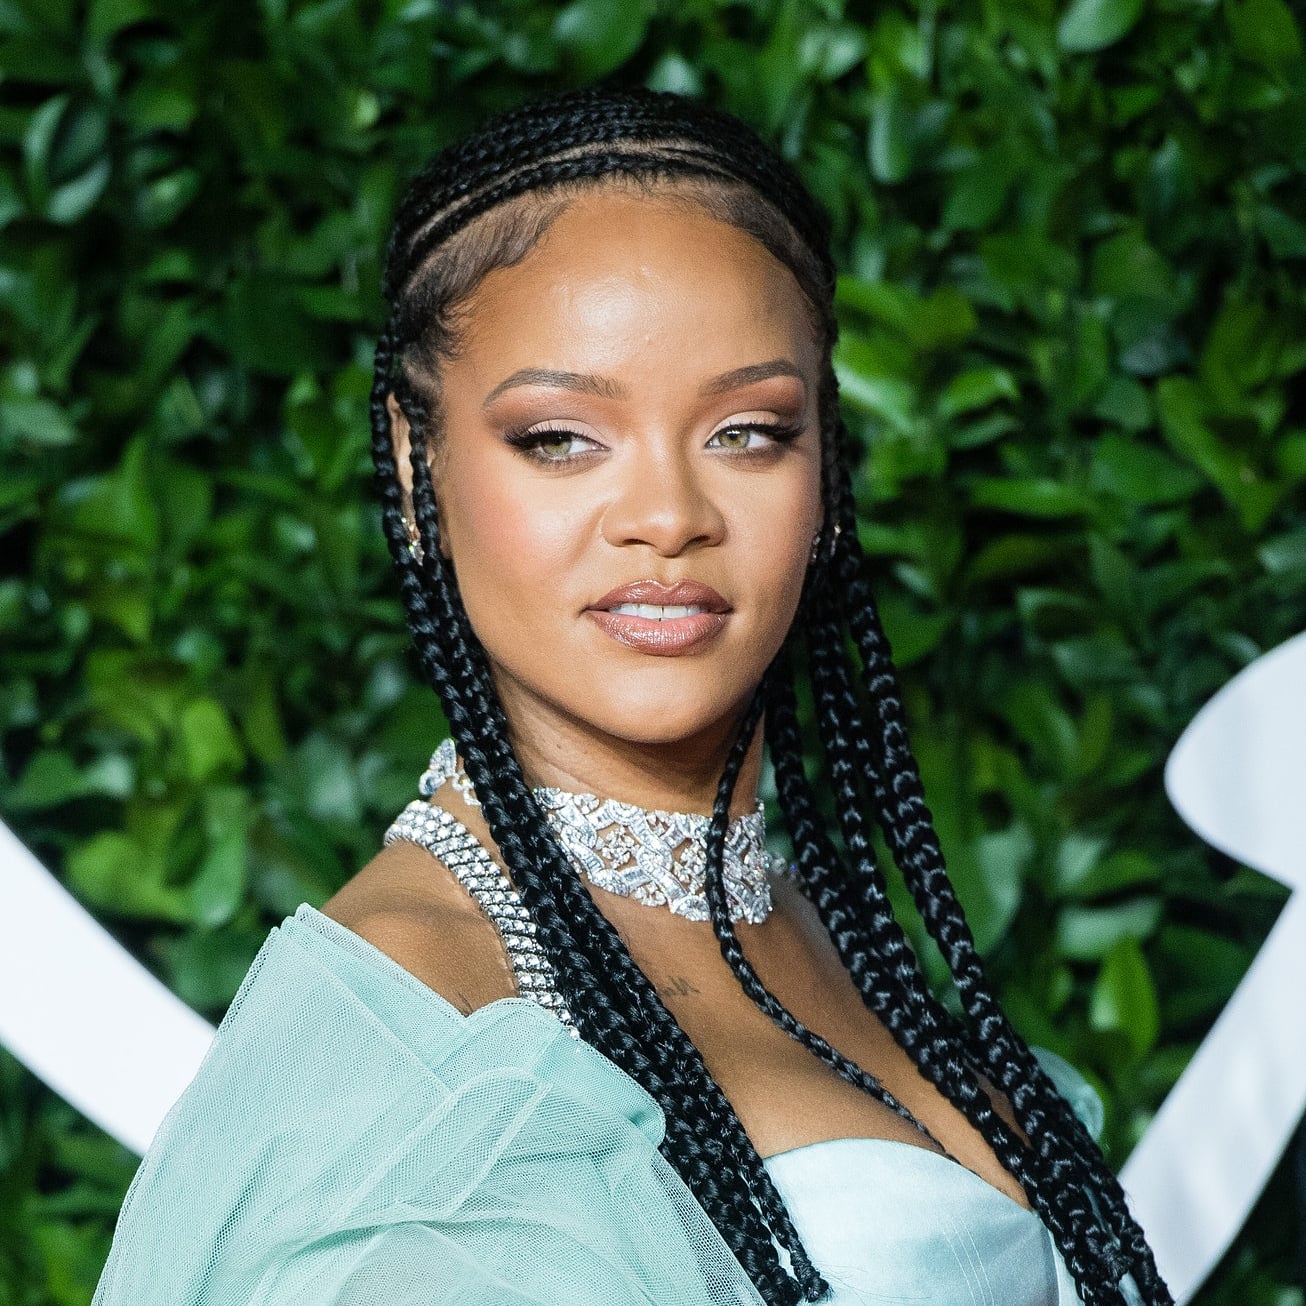 Rihanna 2021 / Rihanna Plans For 2021 Includes Tons Of New Music